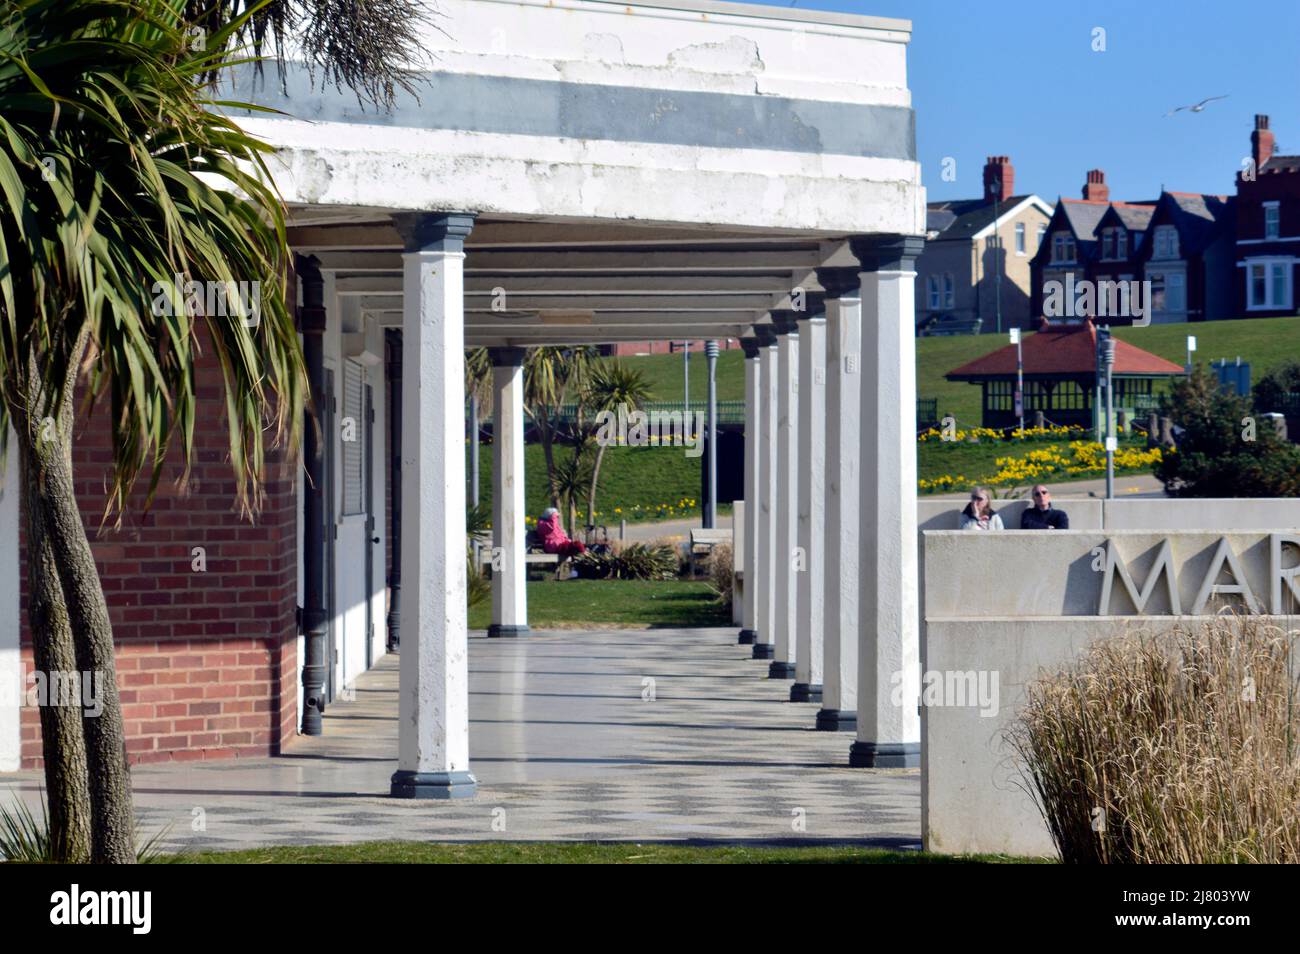 FLEETWOOD. LANCASHIRE. ENGLAND. 03-19-22. The colonade on the frontage of the Marine Hall, a performance and events venue on the seafront. Stock Photo